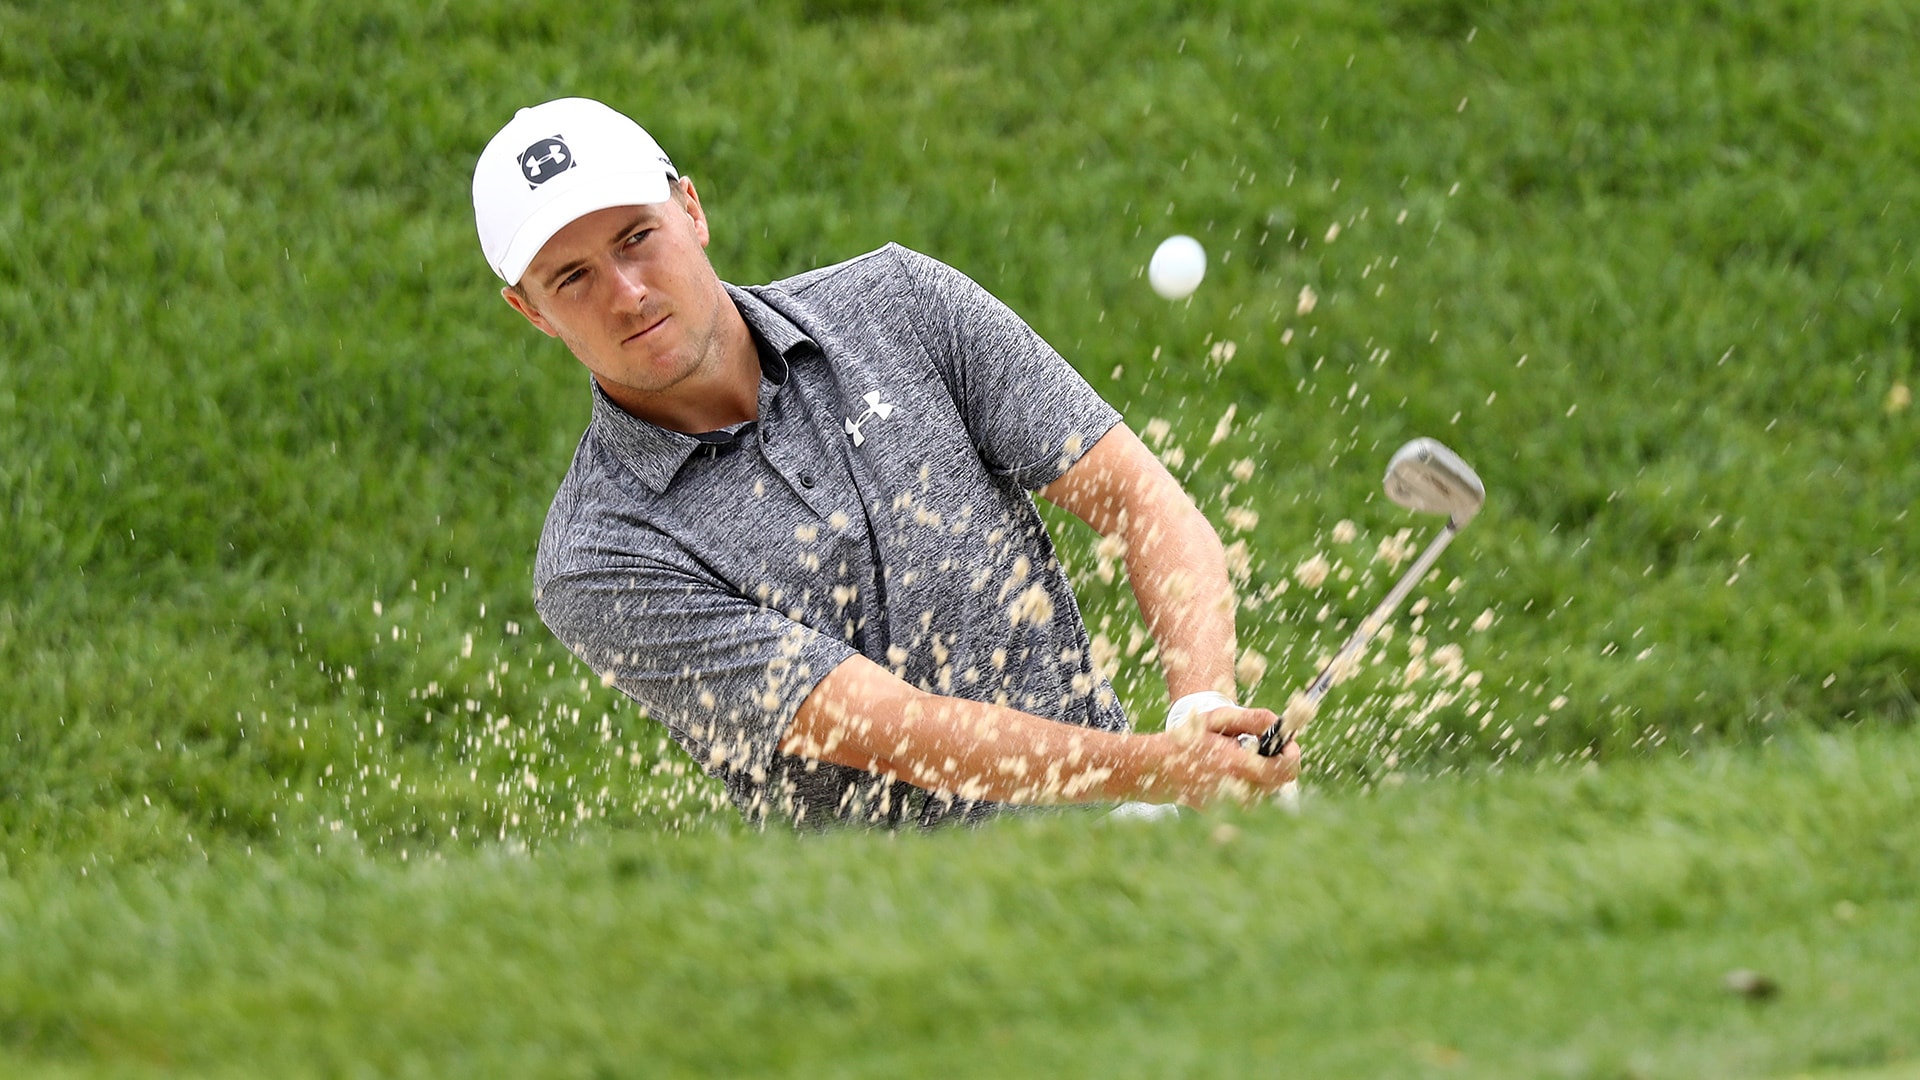 Jordan Spieth proud of overall progress after ‘fine’ first-round 70 at Memorial